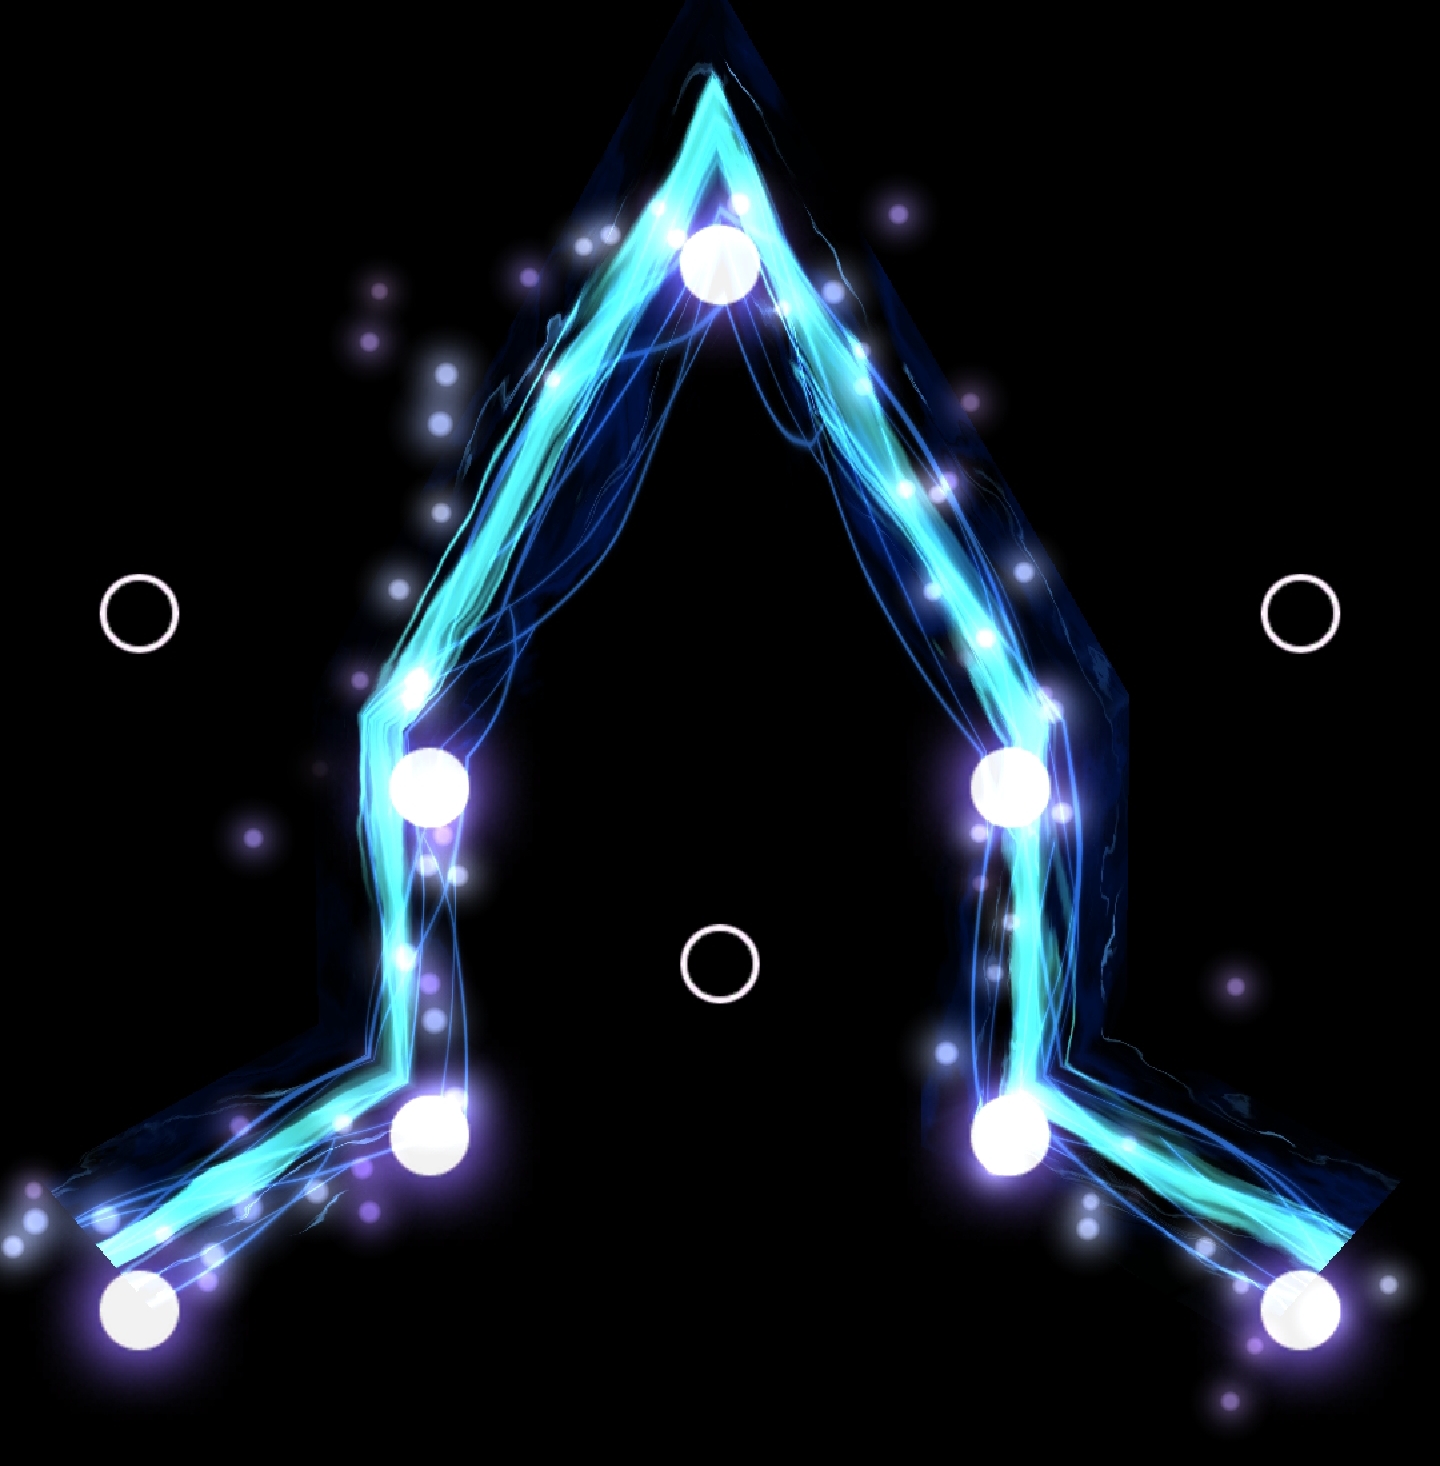 https://static.wikia.nocookie.net/ingress/images/3/35/Prime_glyph_Shapers.jpg/revision/latest?cb=20190115211143